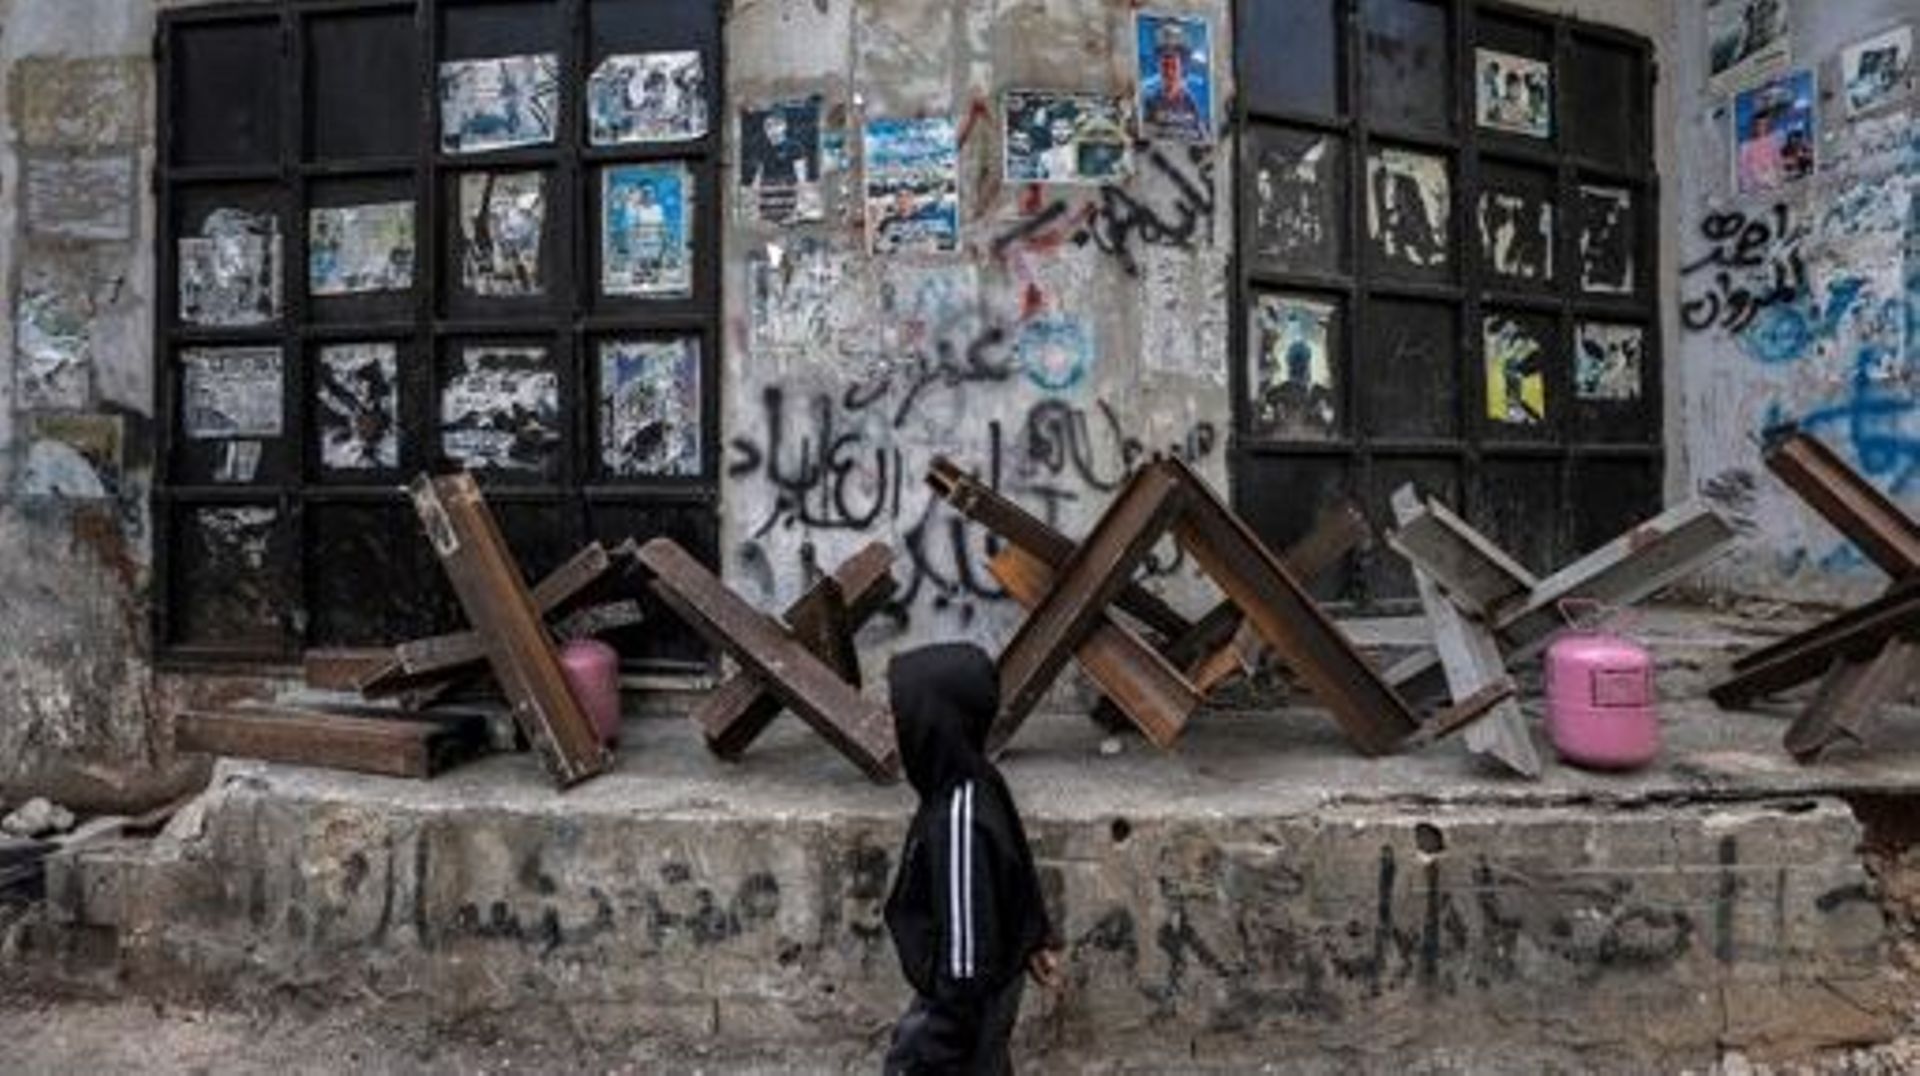 A boy walks past anti-vehicle steel obstacles placed outside closed shops in the Jenin camp for Palestinian refugees in the occupied West Bank on March 8, 2023 during a Palestinian general strike called in protest against the Israeli army raid there the p